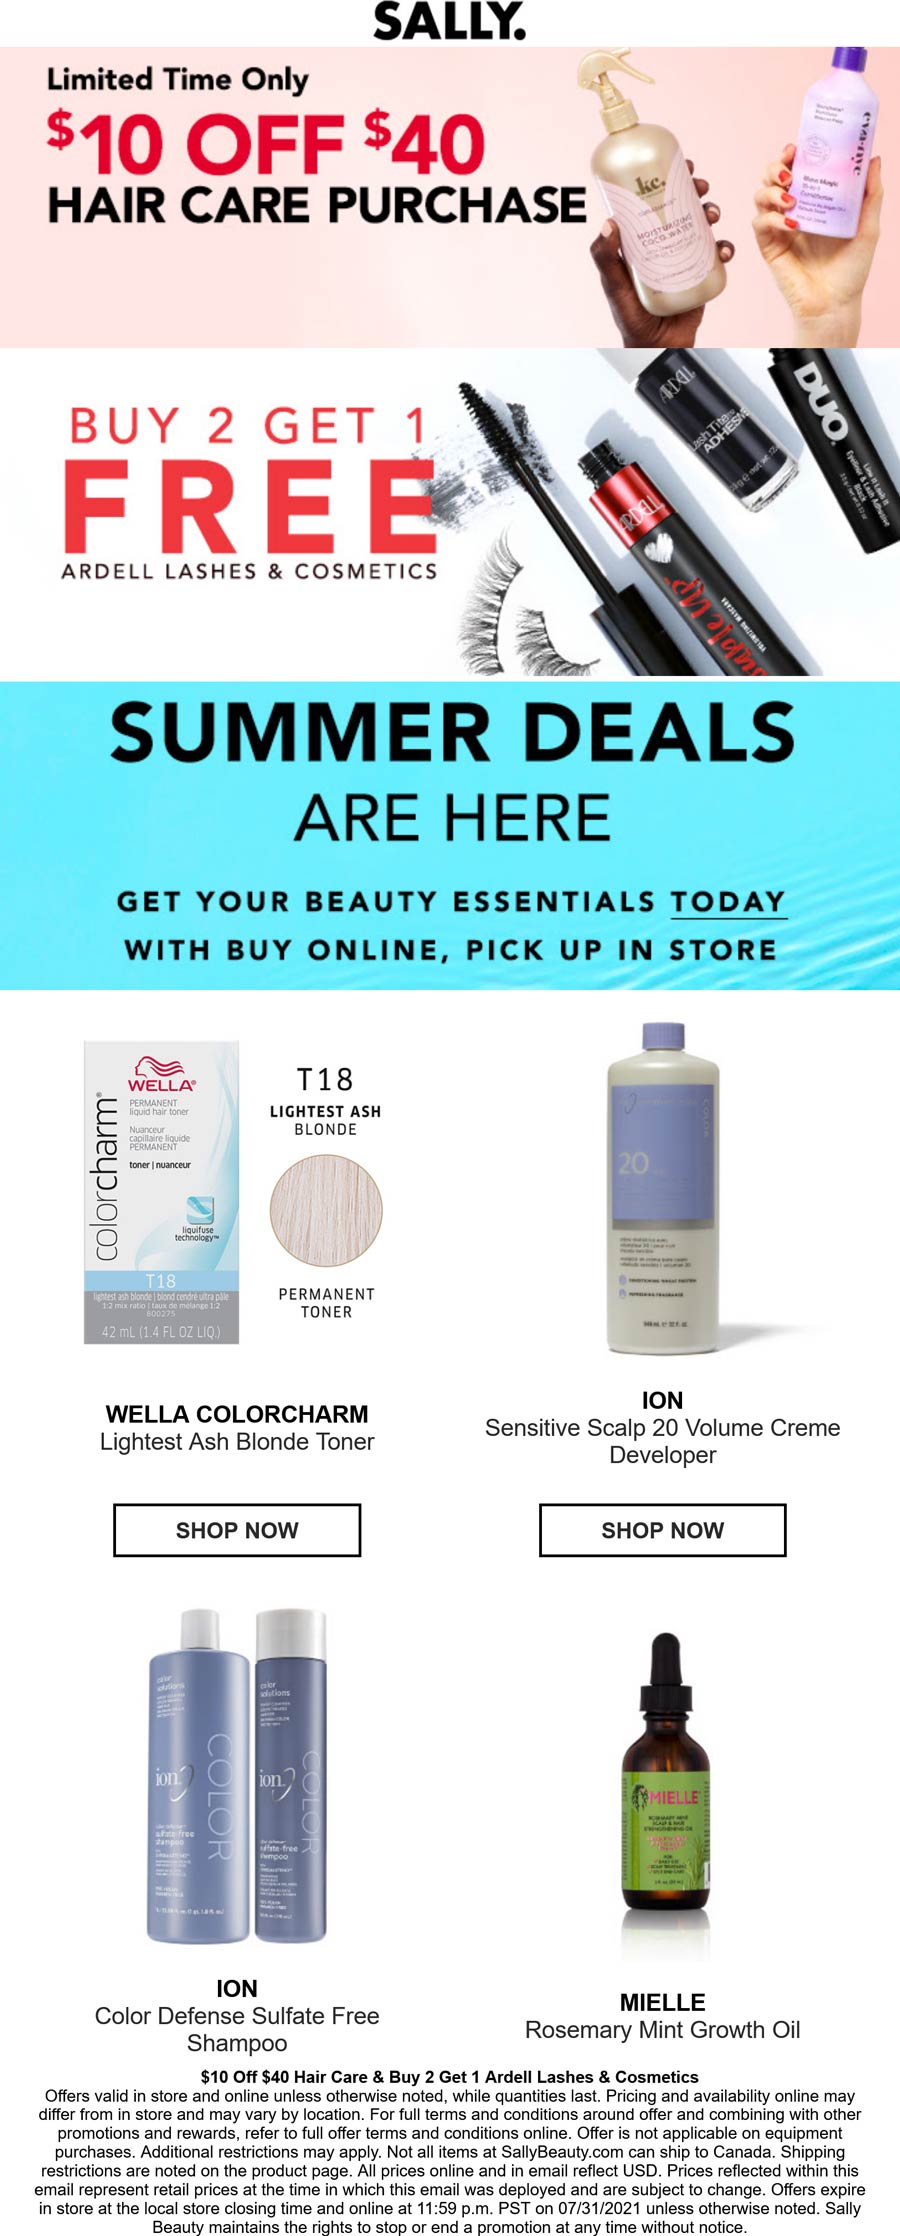 Sally Beauty stores Coupon  $10 off $40 on haircare & 3rd Ardell free at Sally Beauty, ditto online #sallybeauty 